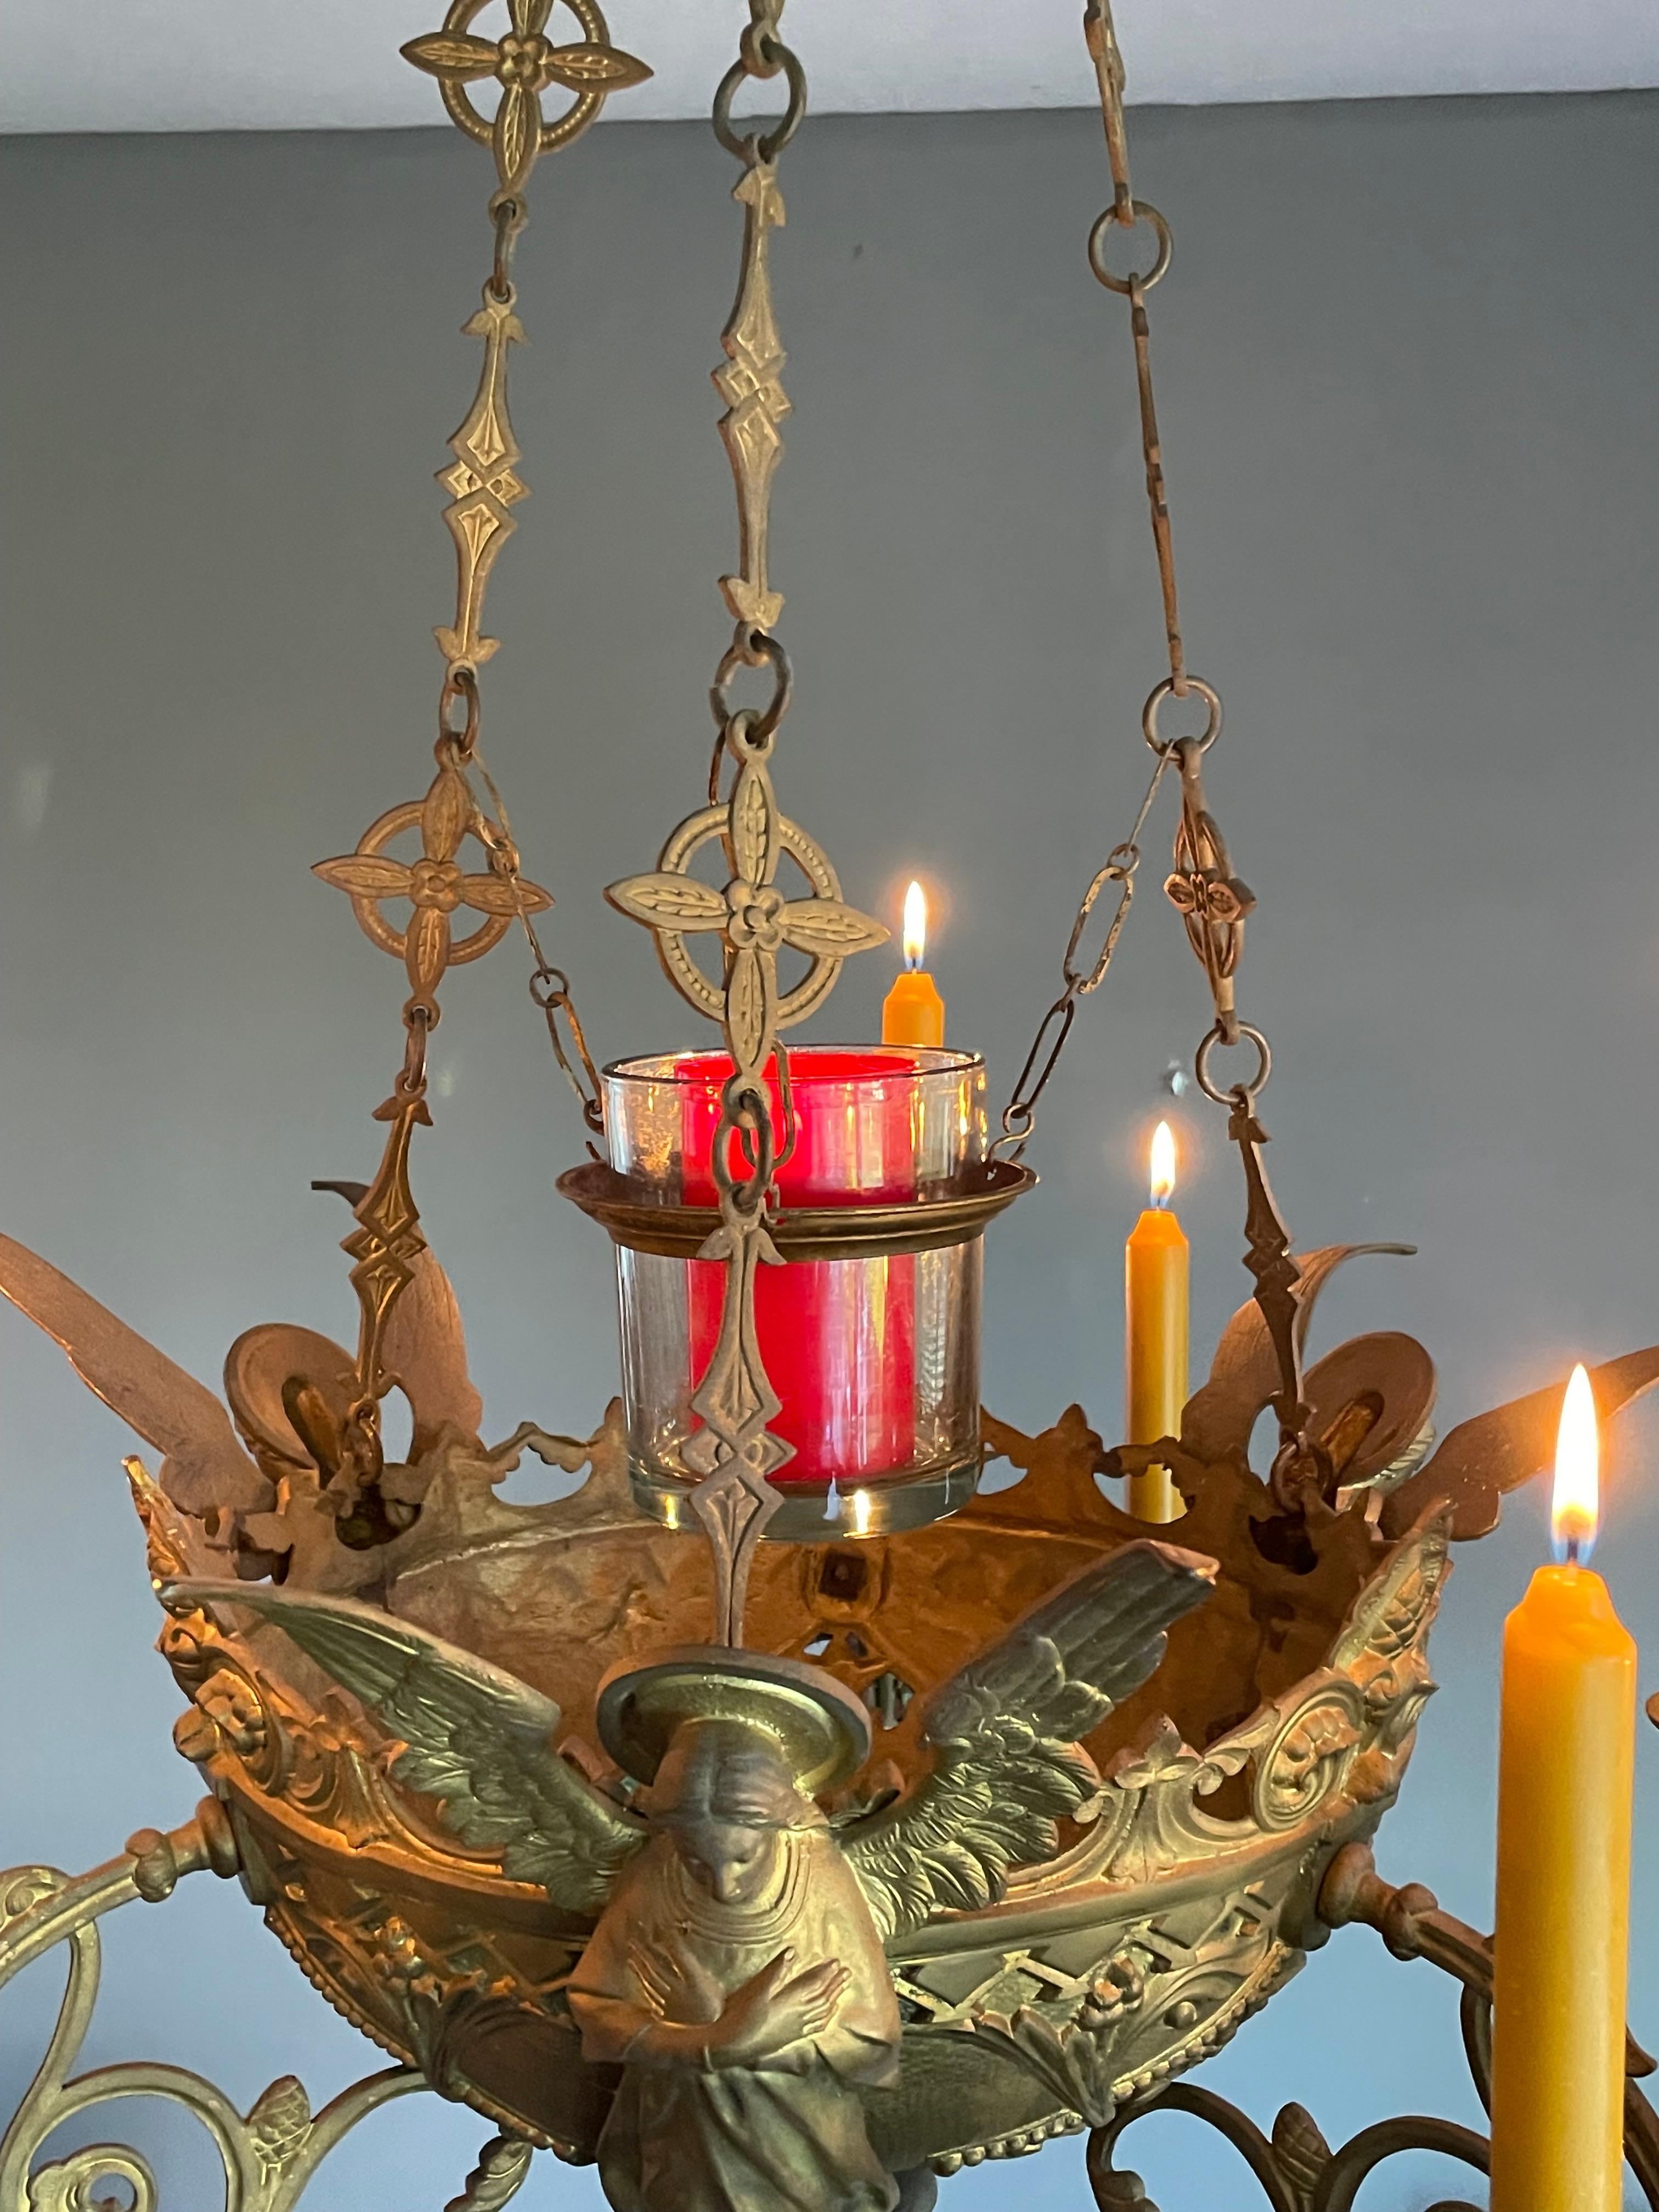 Bronze Gothic Revival Candle Chandelier w. Virgin Mary & Marian Cross Sculptures For Sale 2